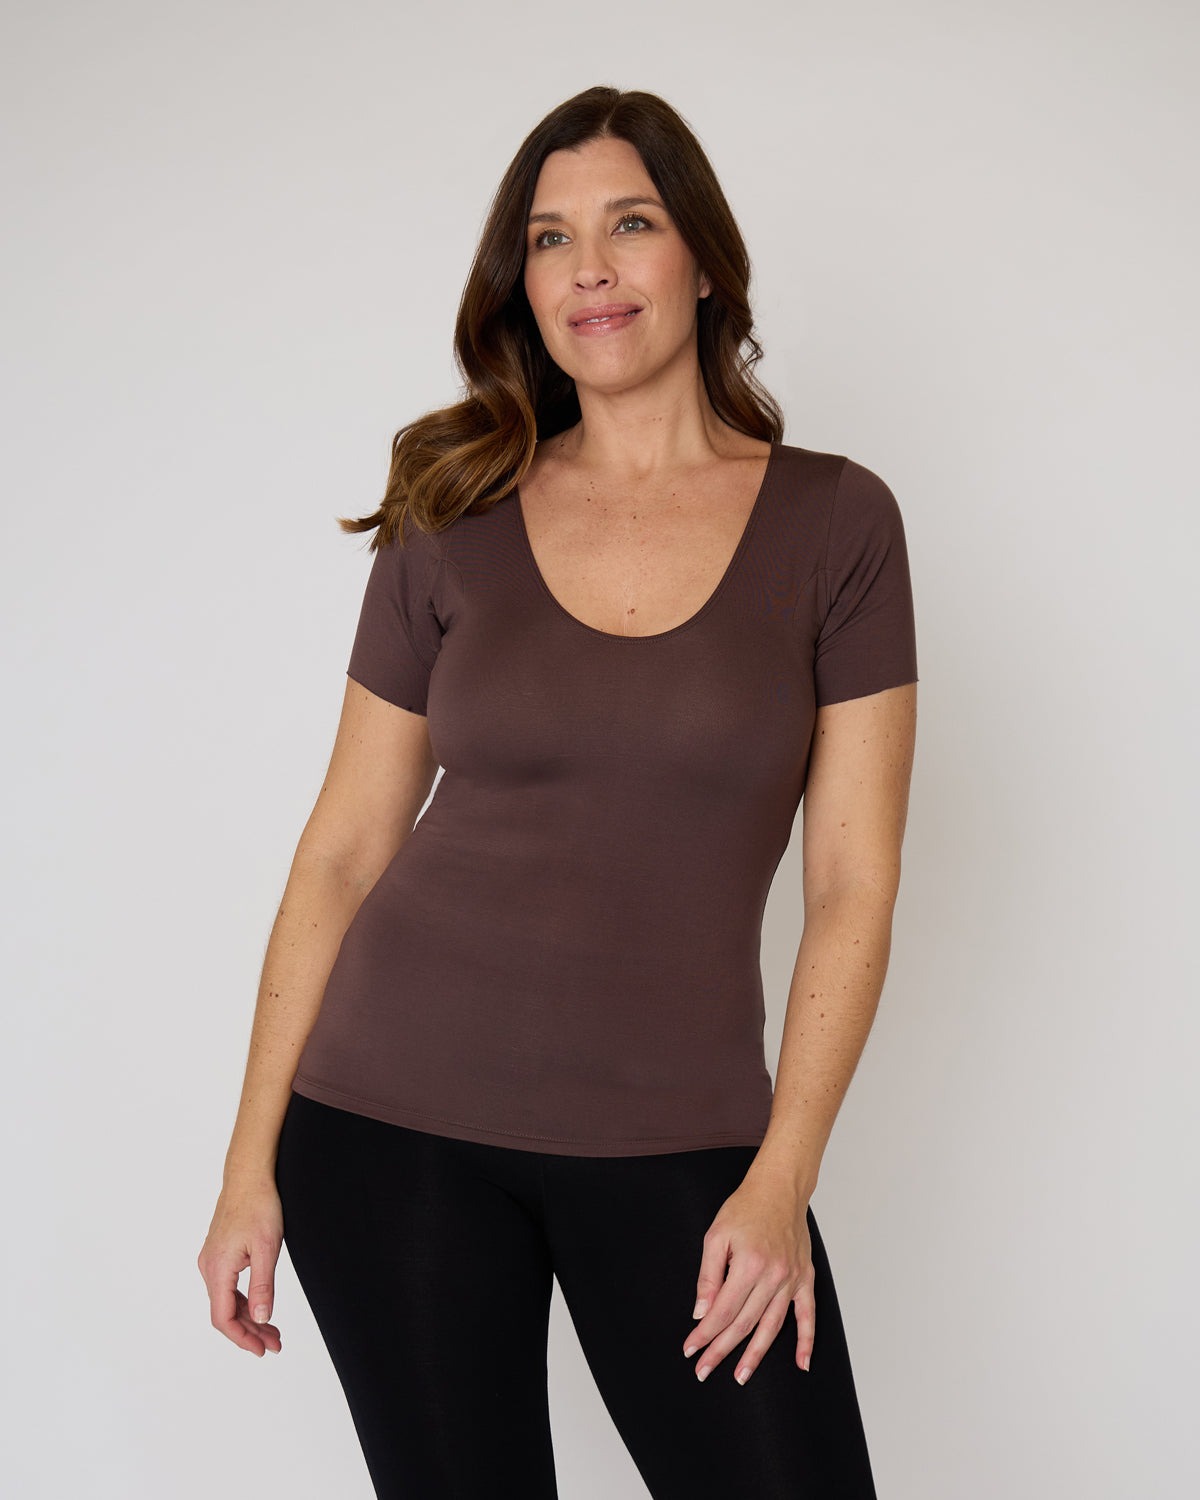 "#color_TRUFFLE | Ashleigh is 5’11” and wears a size L